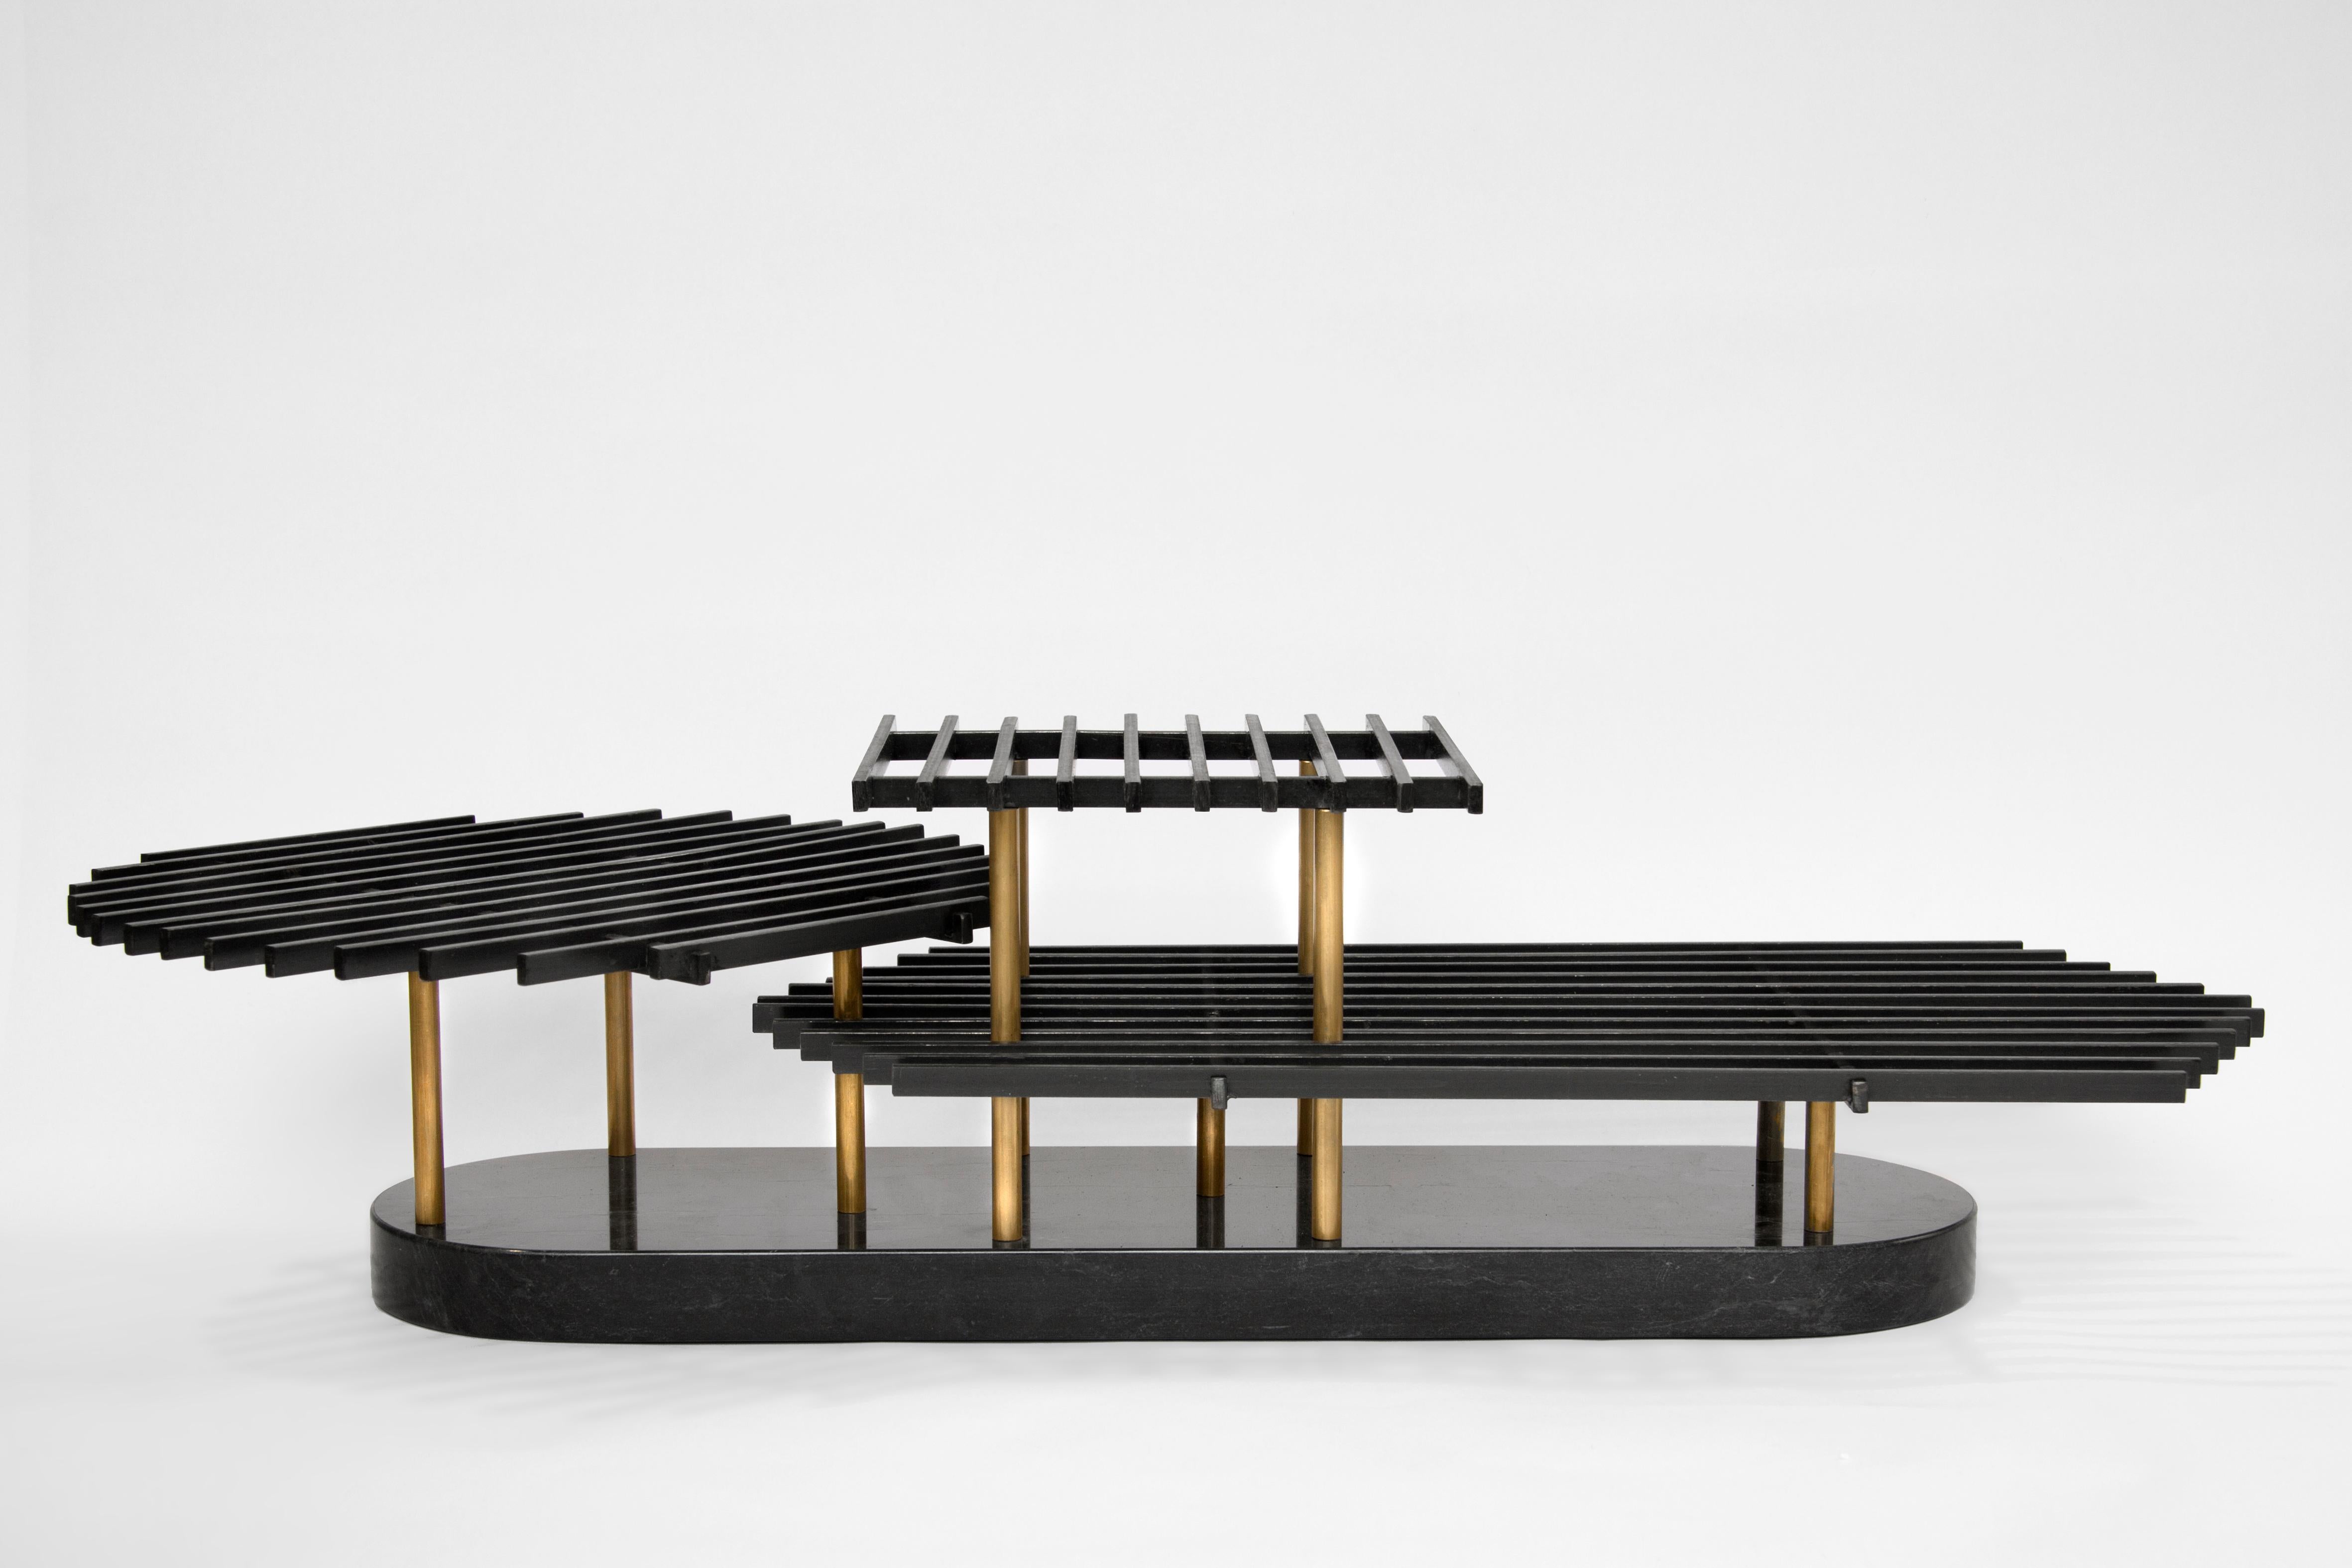 Saracinesca table podium by Oeuffice
Edition: 12 + 2AP
2013
Dimensions: 75 x 32 x 19 cm
Materials: Black oxide steel, solid brass and black marble of ormea

An overlapping collage of grids and planes inspired by the ornate detailing of